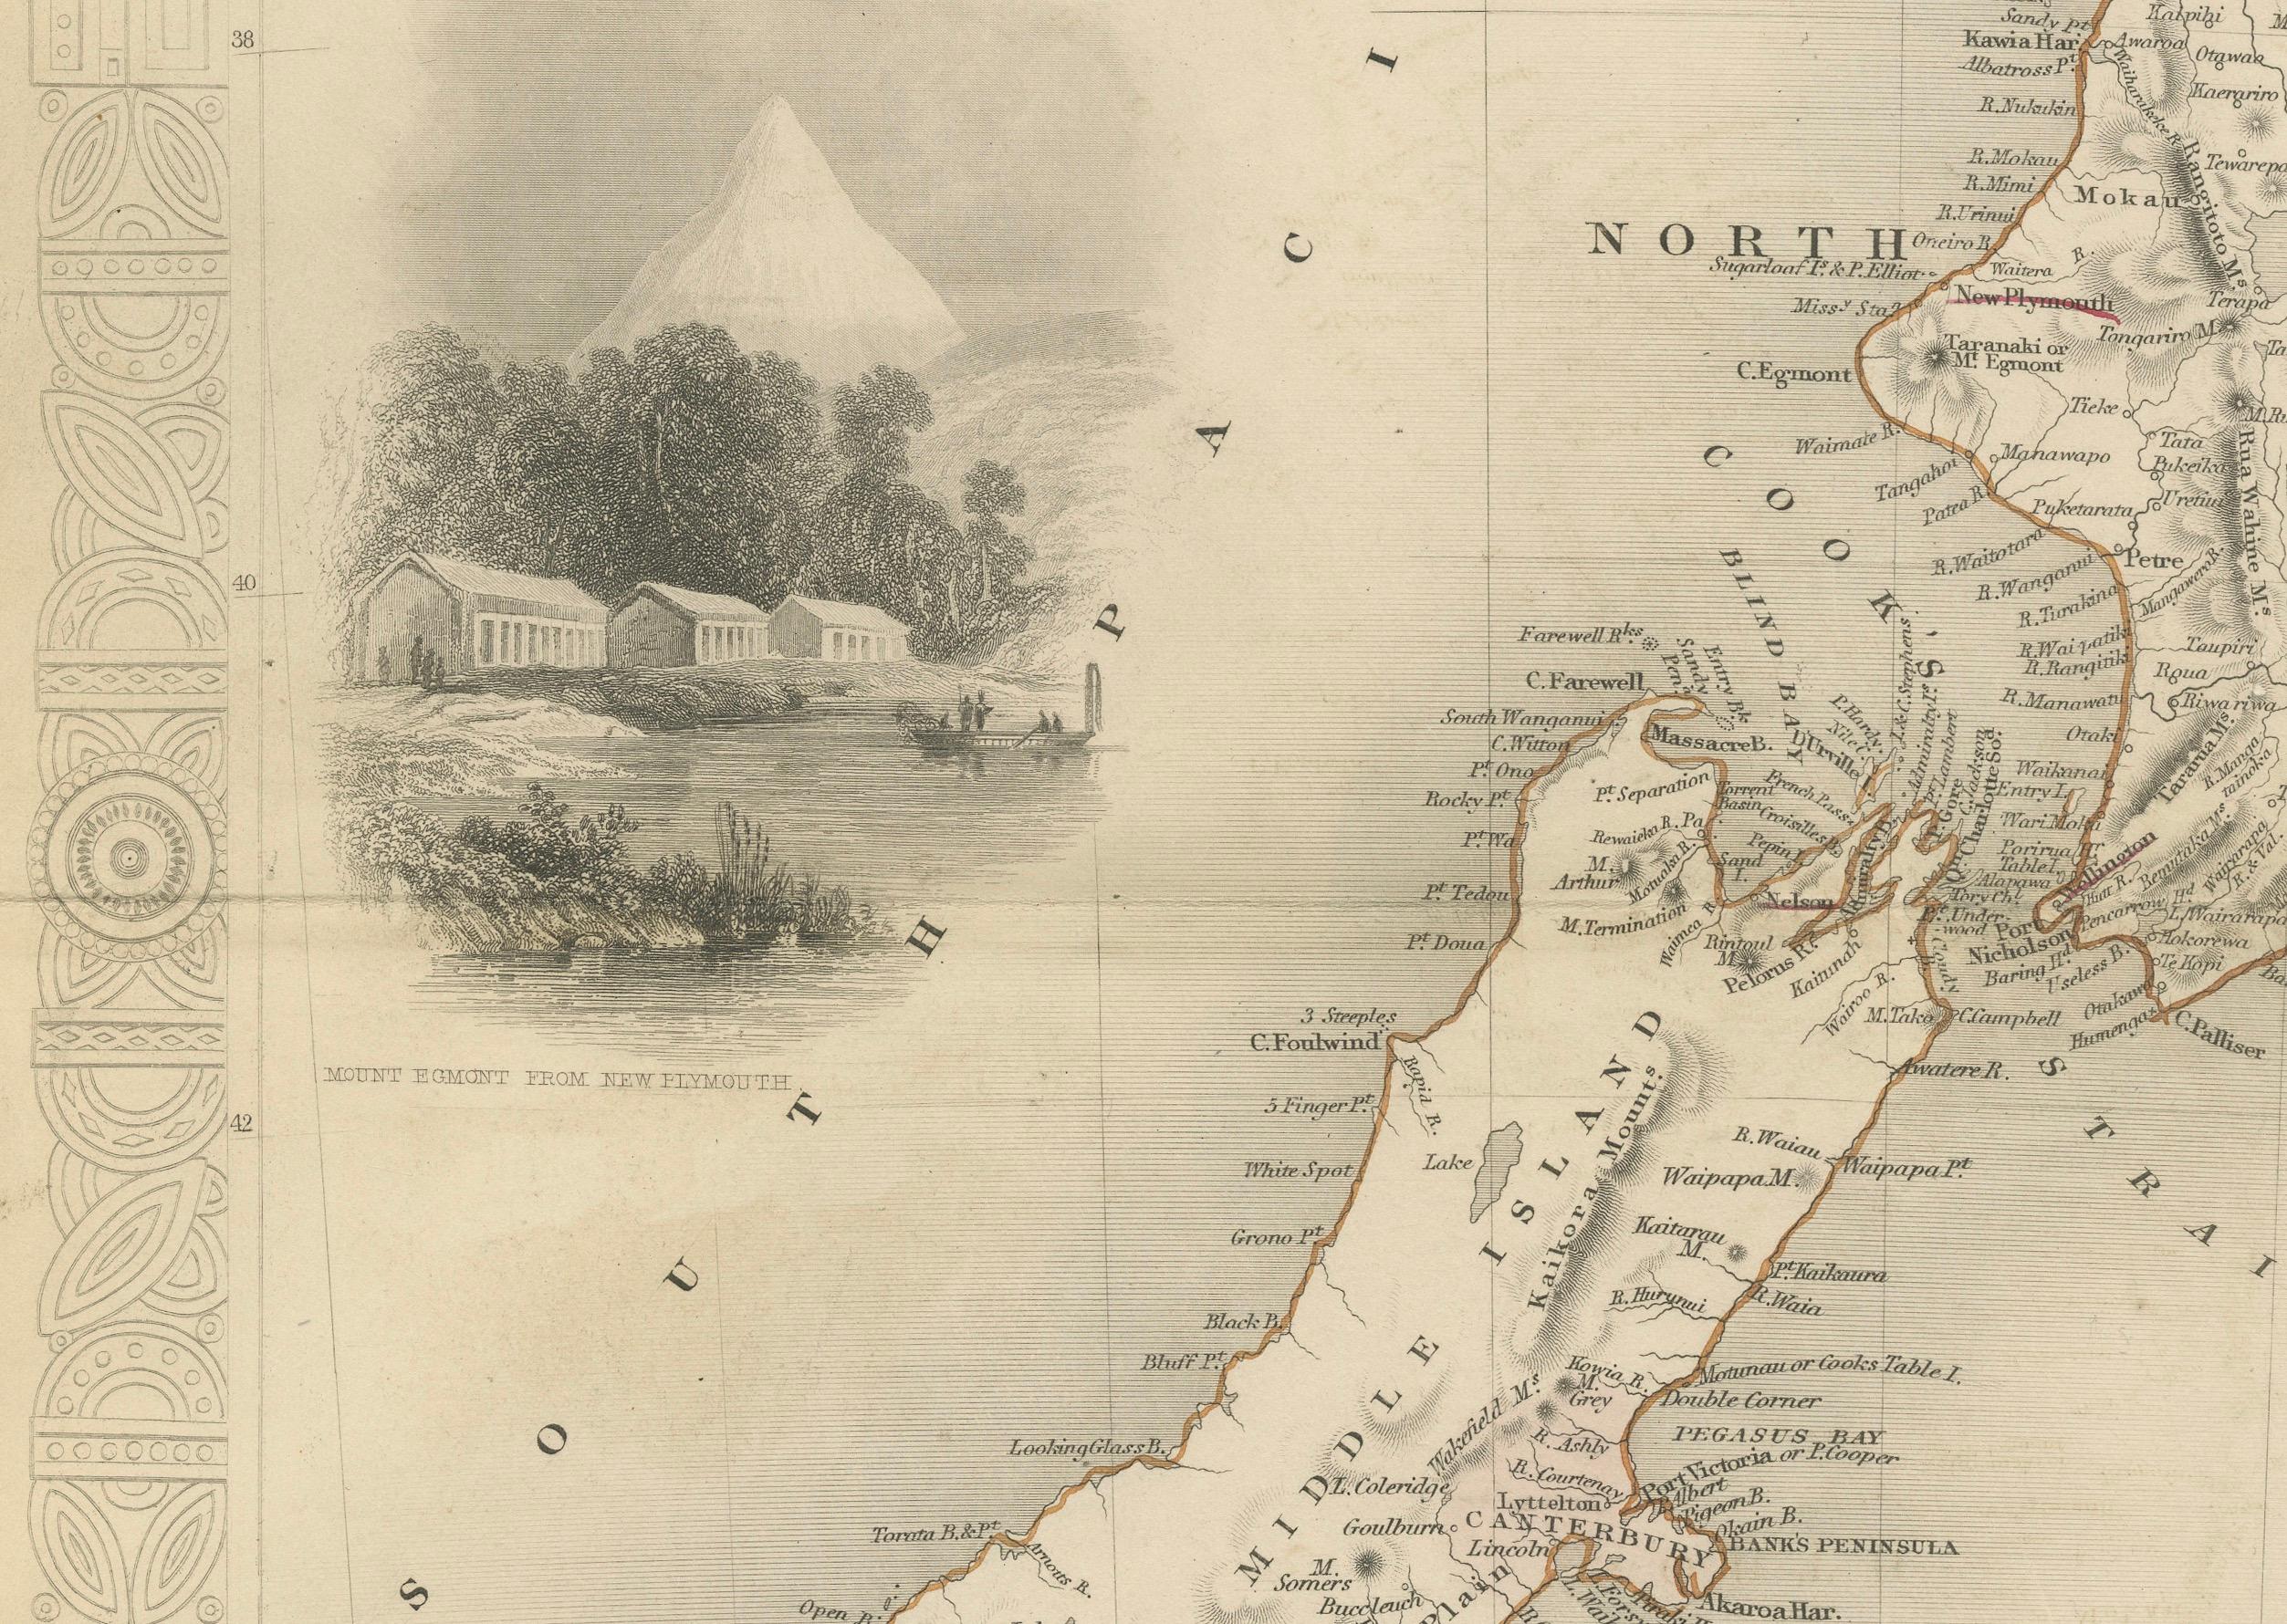 Paper Map of New Zealand Showing Maori Culture and Early Colonial Settlements, 1851 For Sale